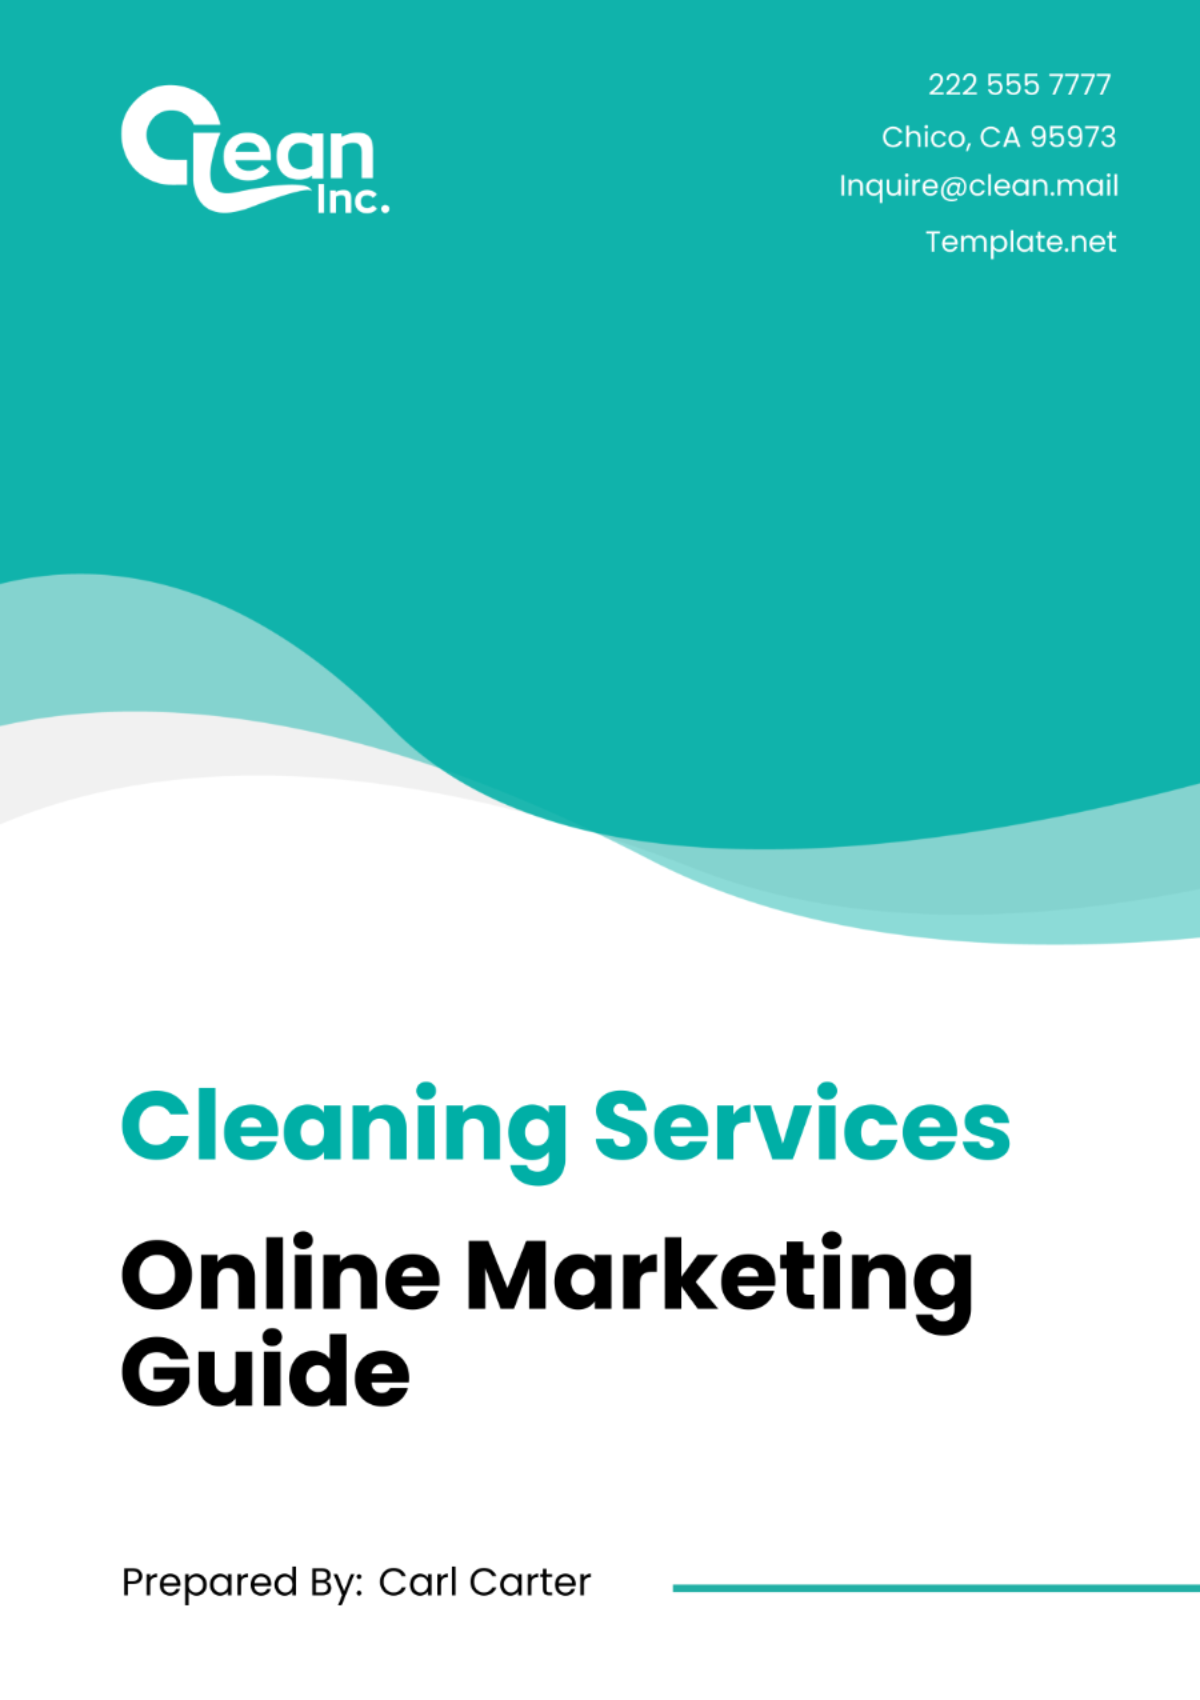 Cleaning Services Online Marketing Guide Template